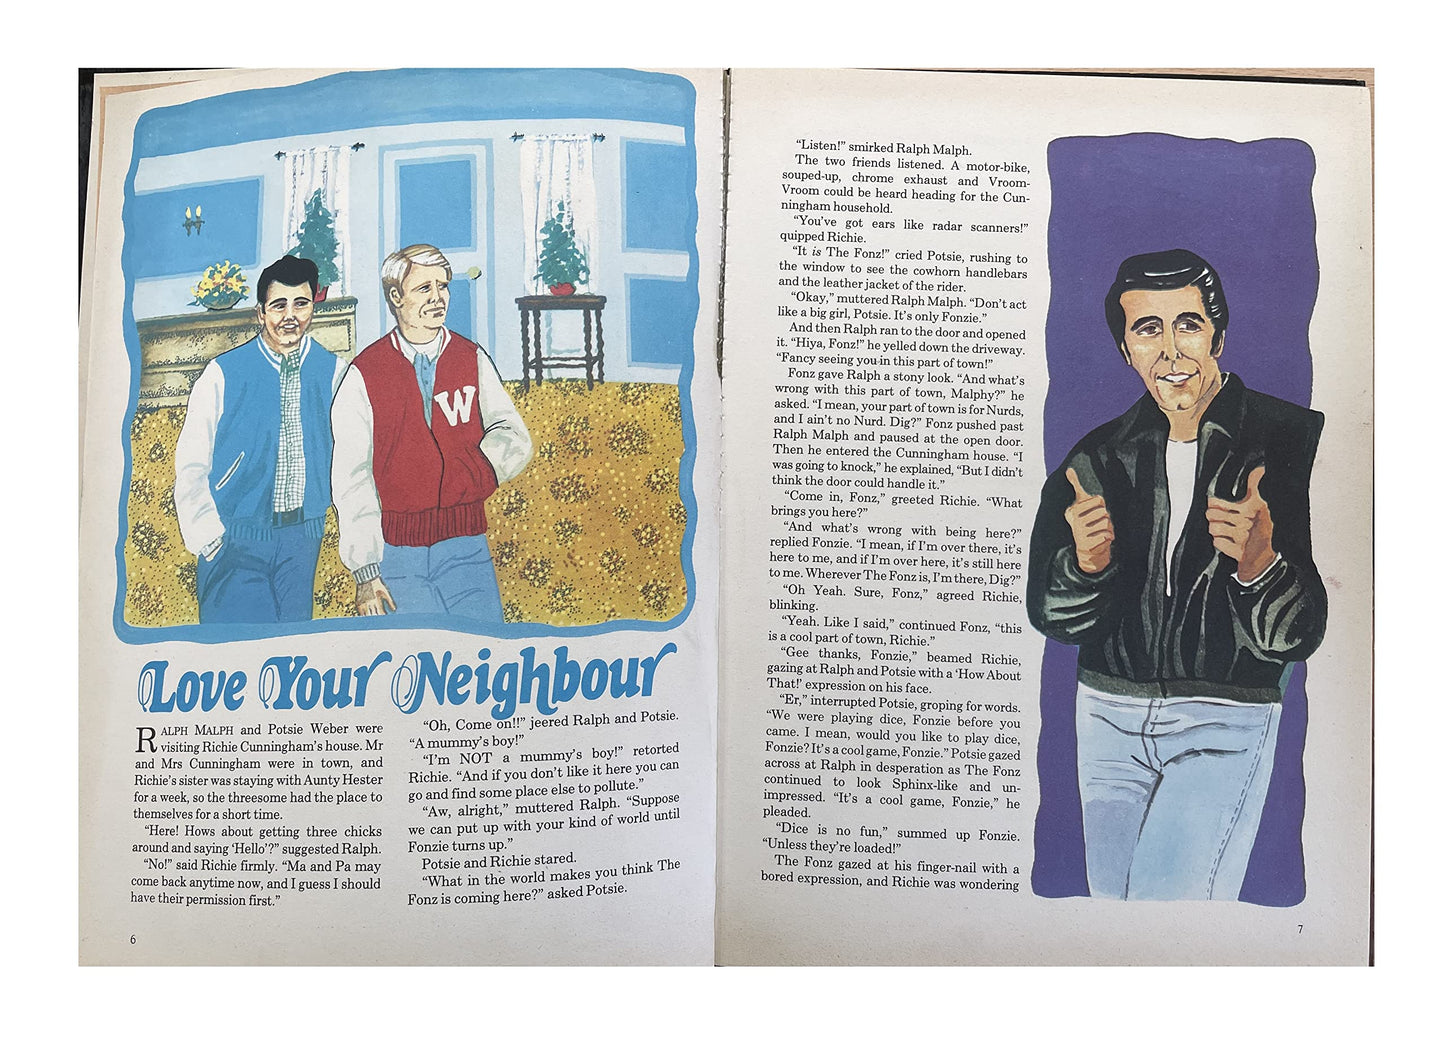 Vintage Happy Days Annual 1979 – Based On The Popular TV Series